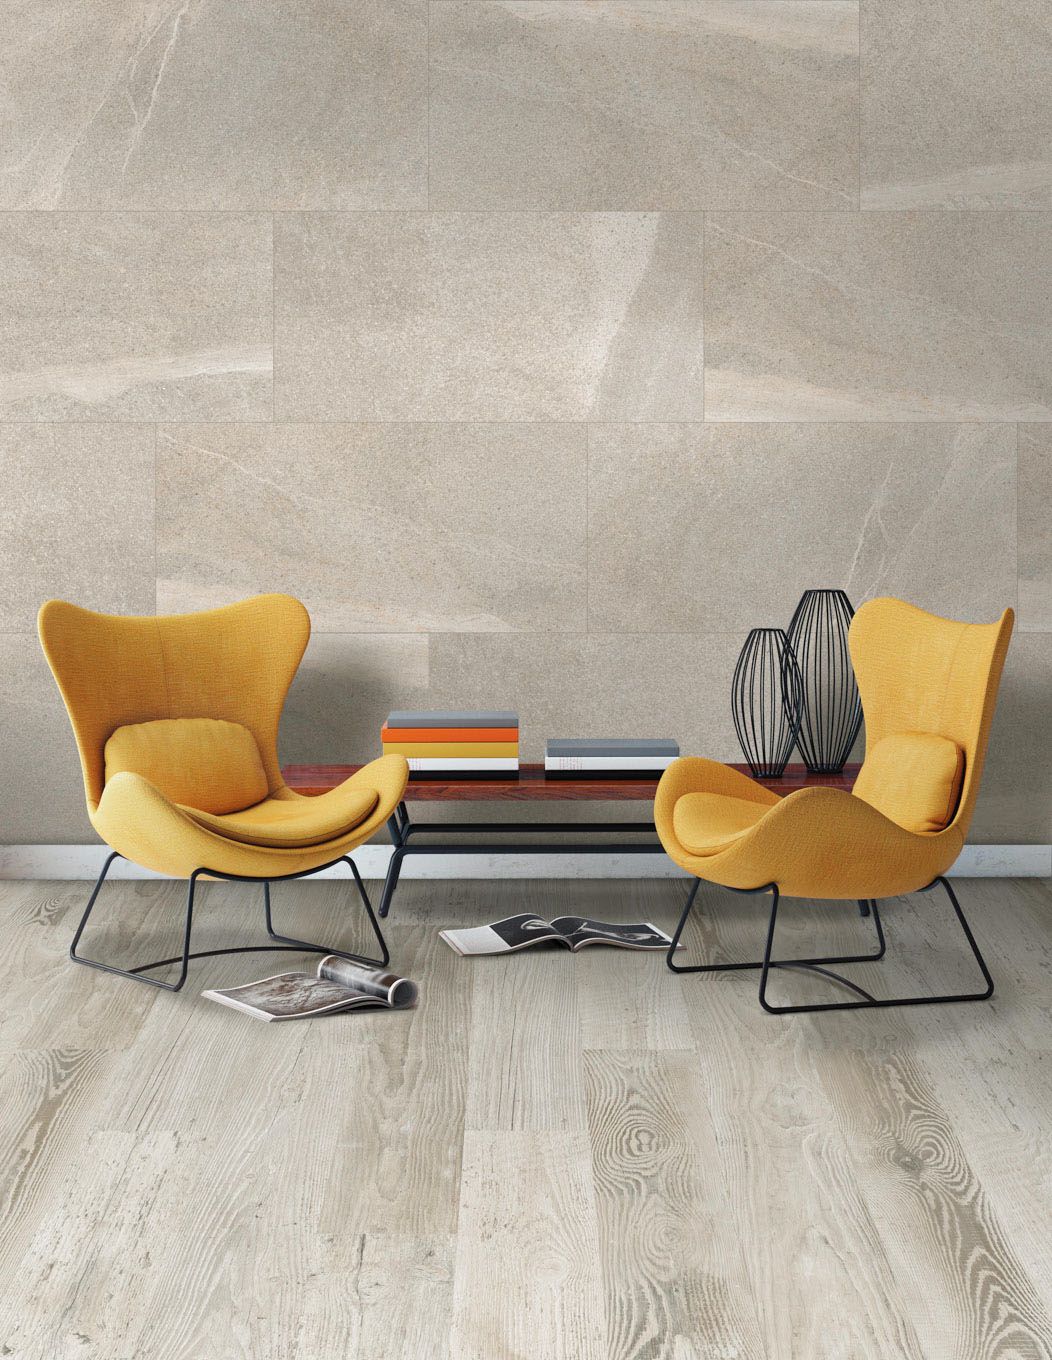 UPTILES - ORISTANO TIMBER TILES COLLECTION BY TAU CERAMICA